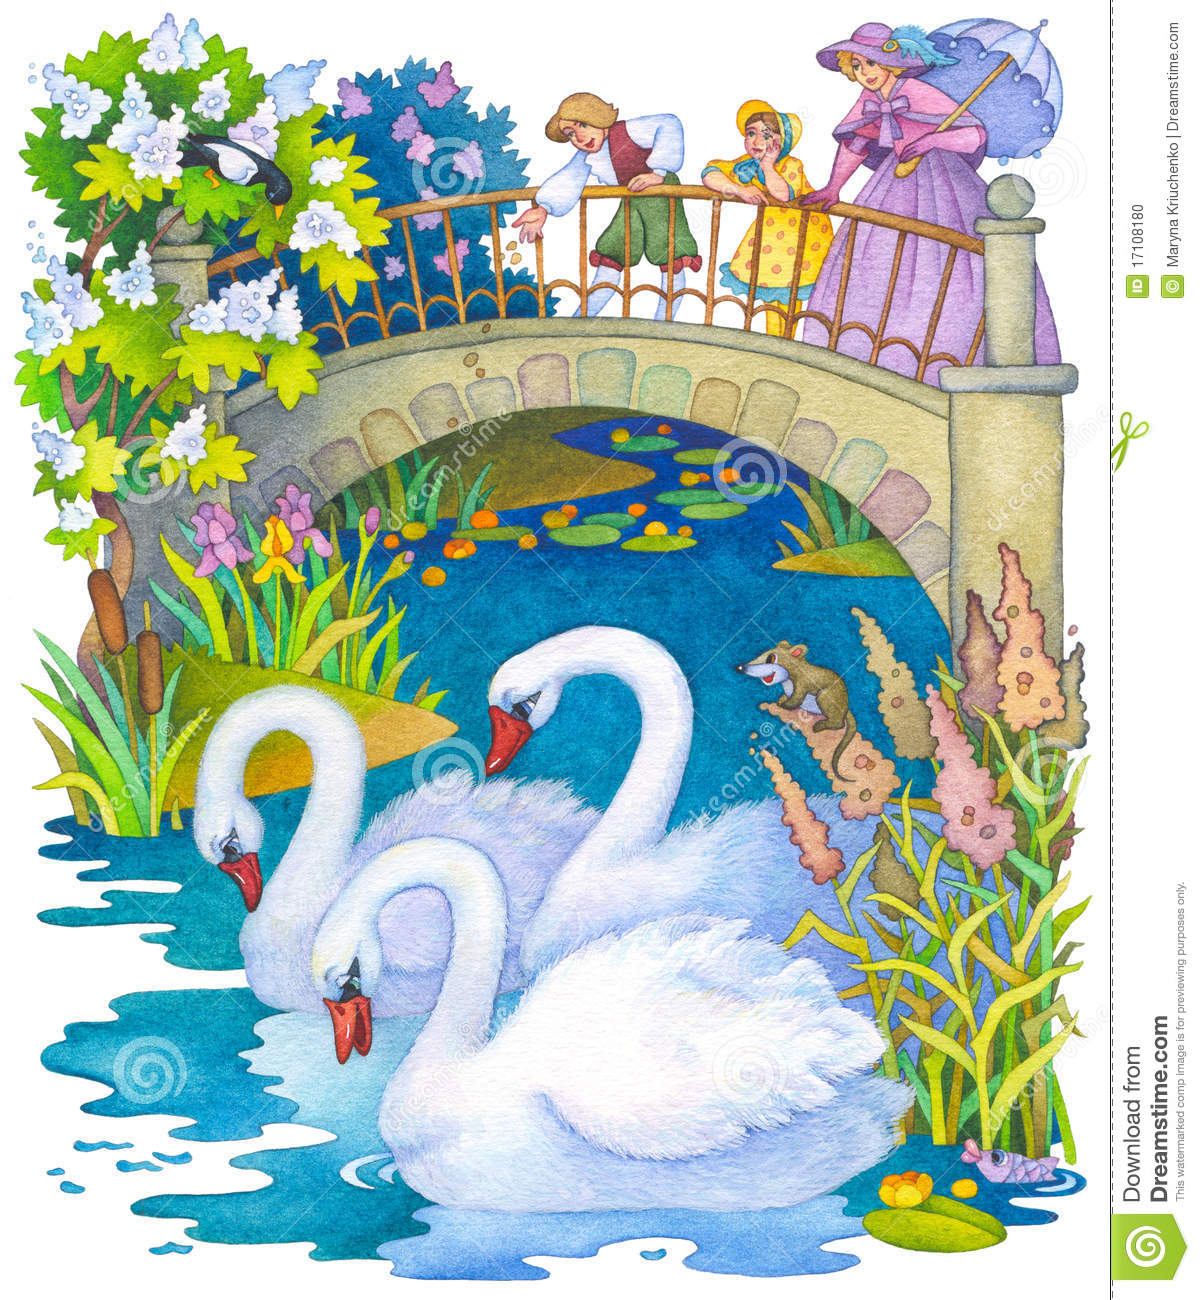 The Park Feeding The Swans On The Pond Stock Photo   Image  17108180